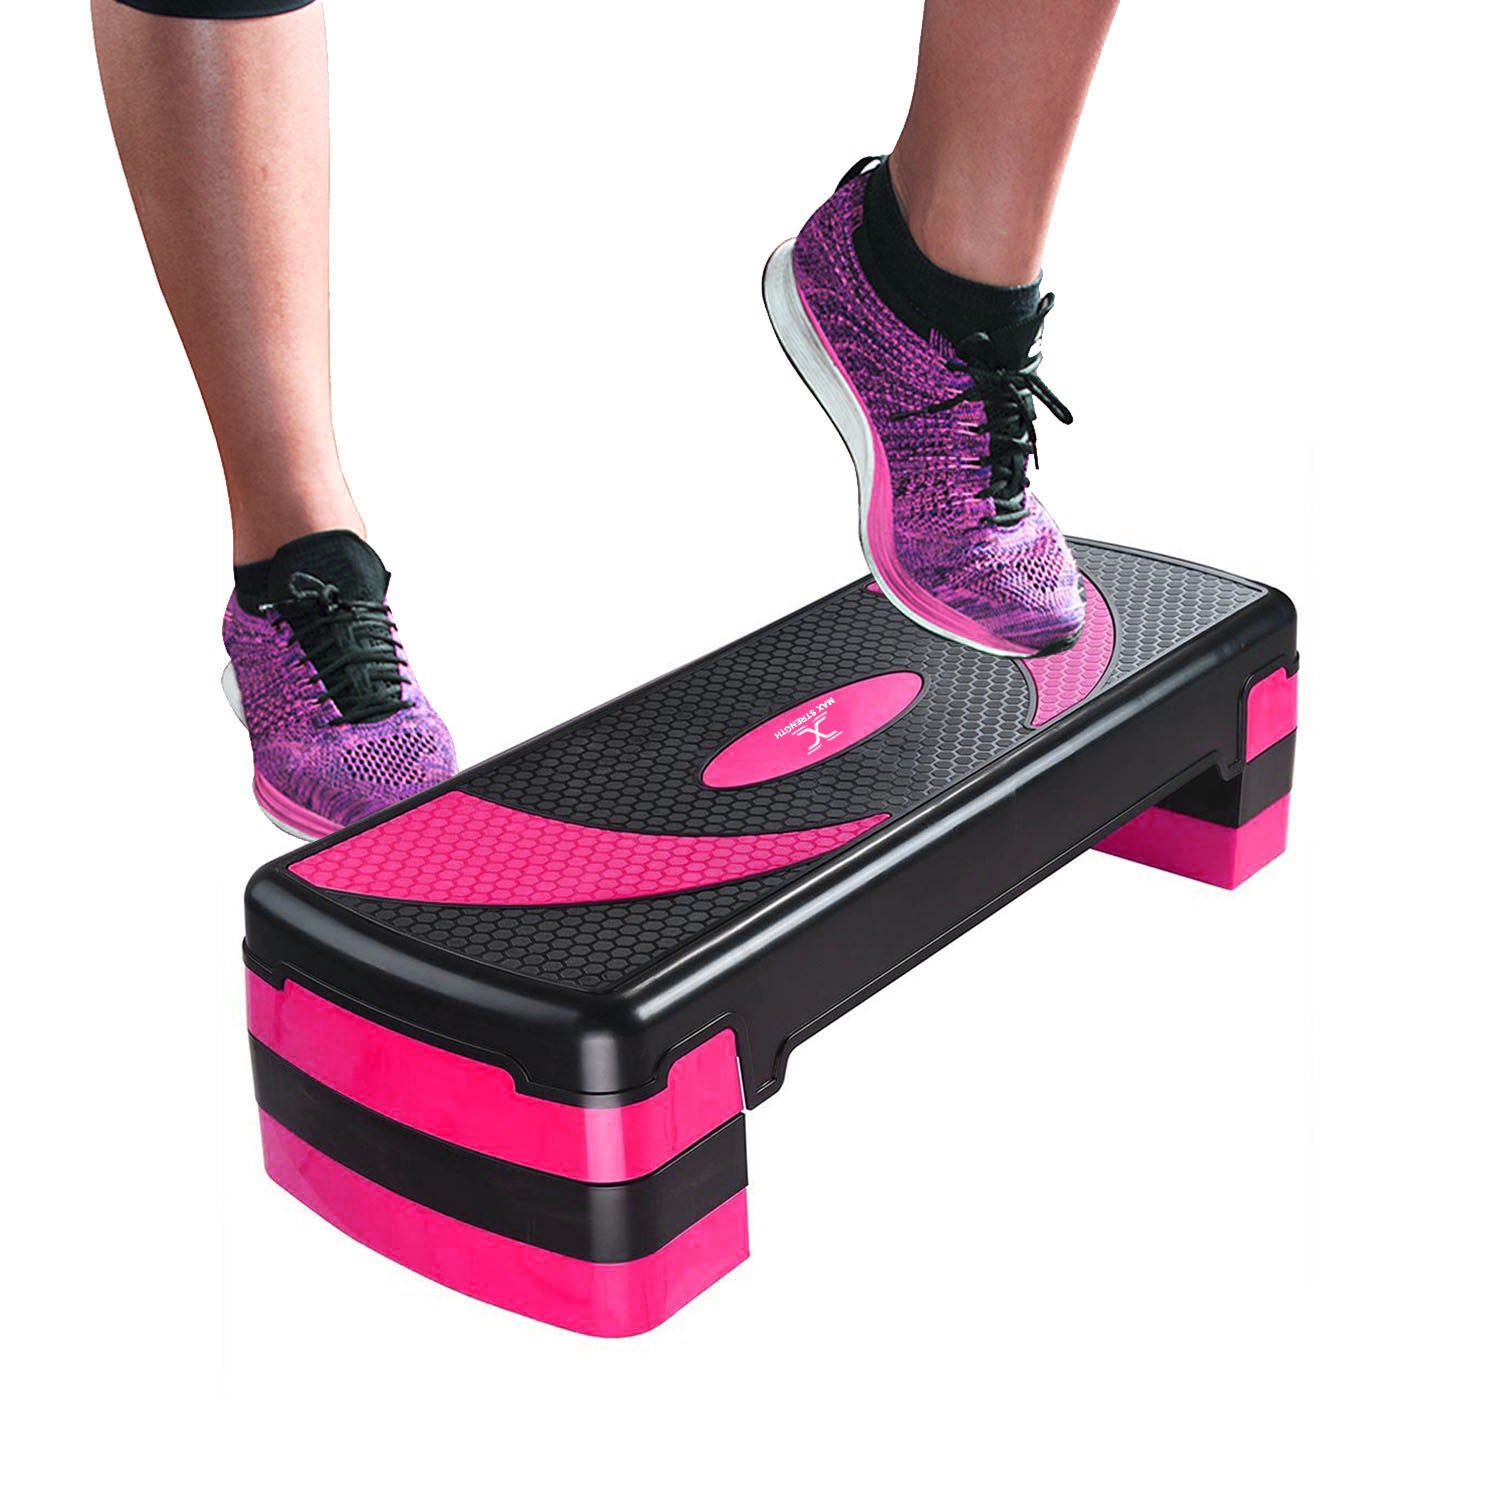 B Fit Big Size Aerobic Step - 2 Levels Height Adjustable (6/8 inch), Color  Red and Black Non Slip Rubber Surface, 200 kg Max - Fitness Stepper, Board